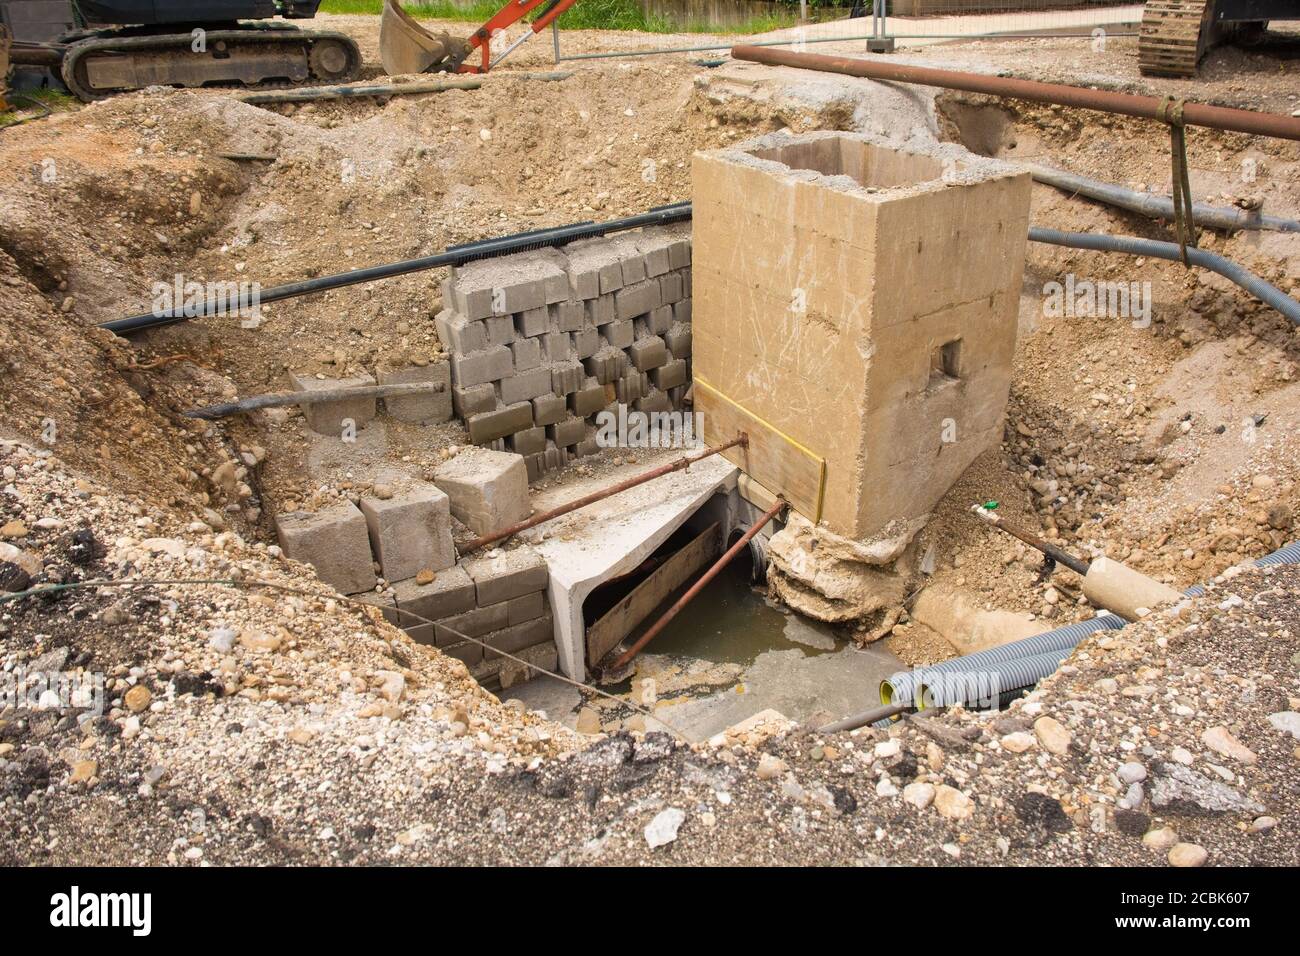 A sewer well trench, part of a sewer system replacement scheme in north west Italy Stock Photo